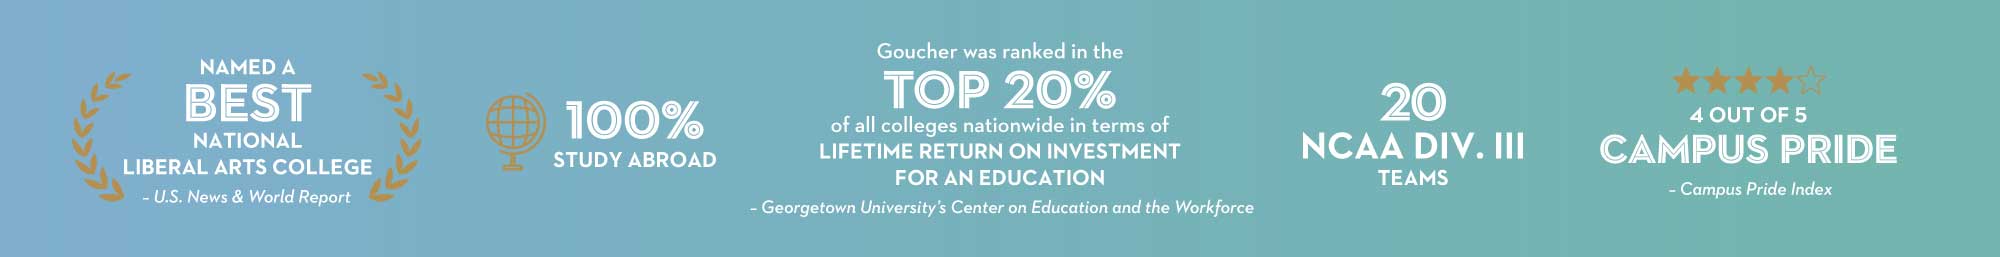 Return On Investment - Goucher was ranked in the Top 20% of colleges nationwide in terms of liftime return on investment for an education.